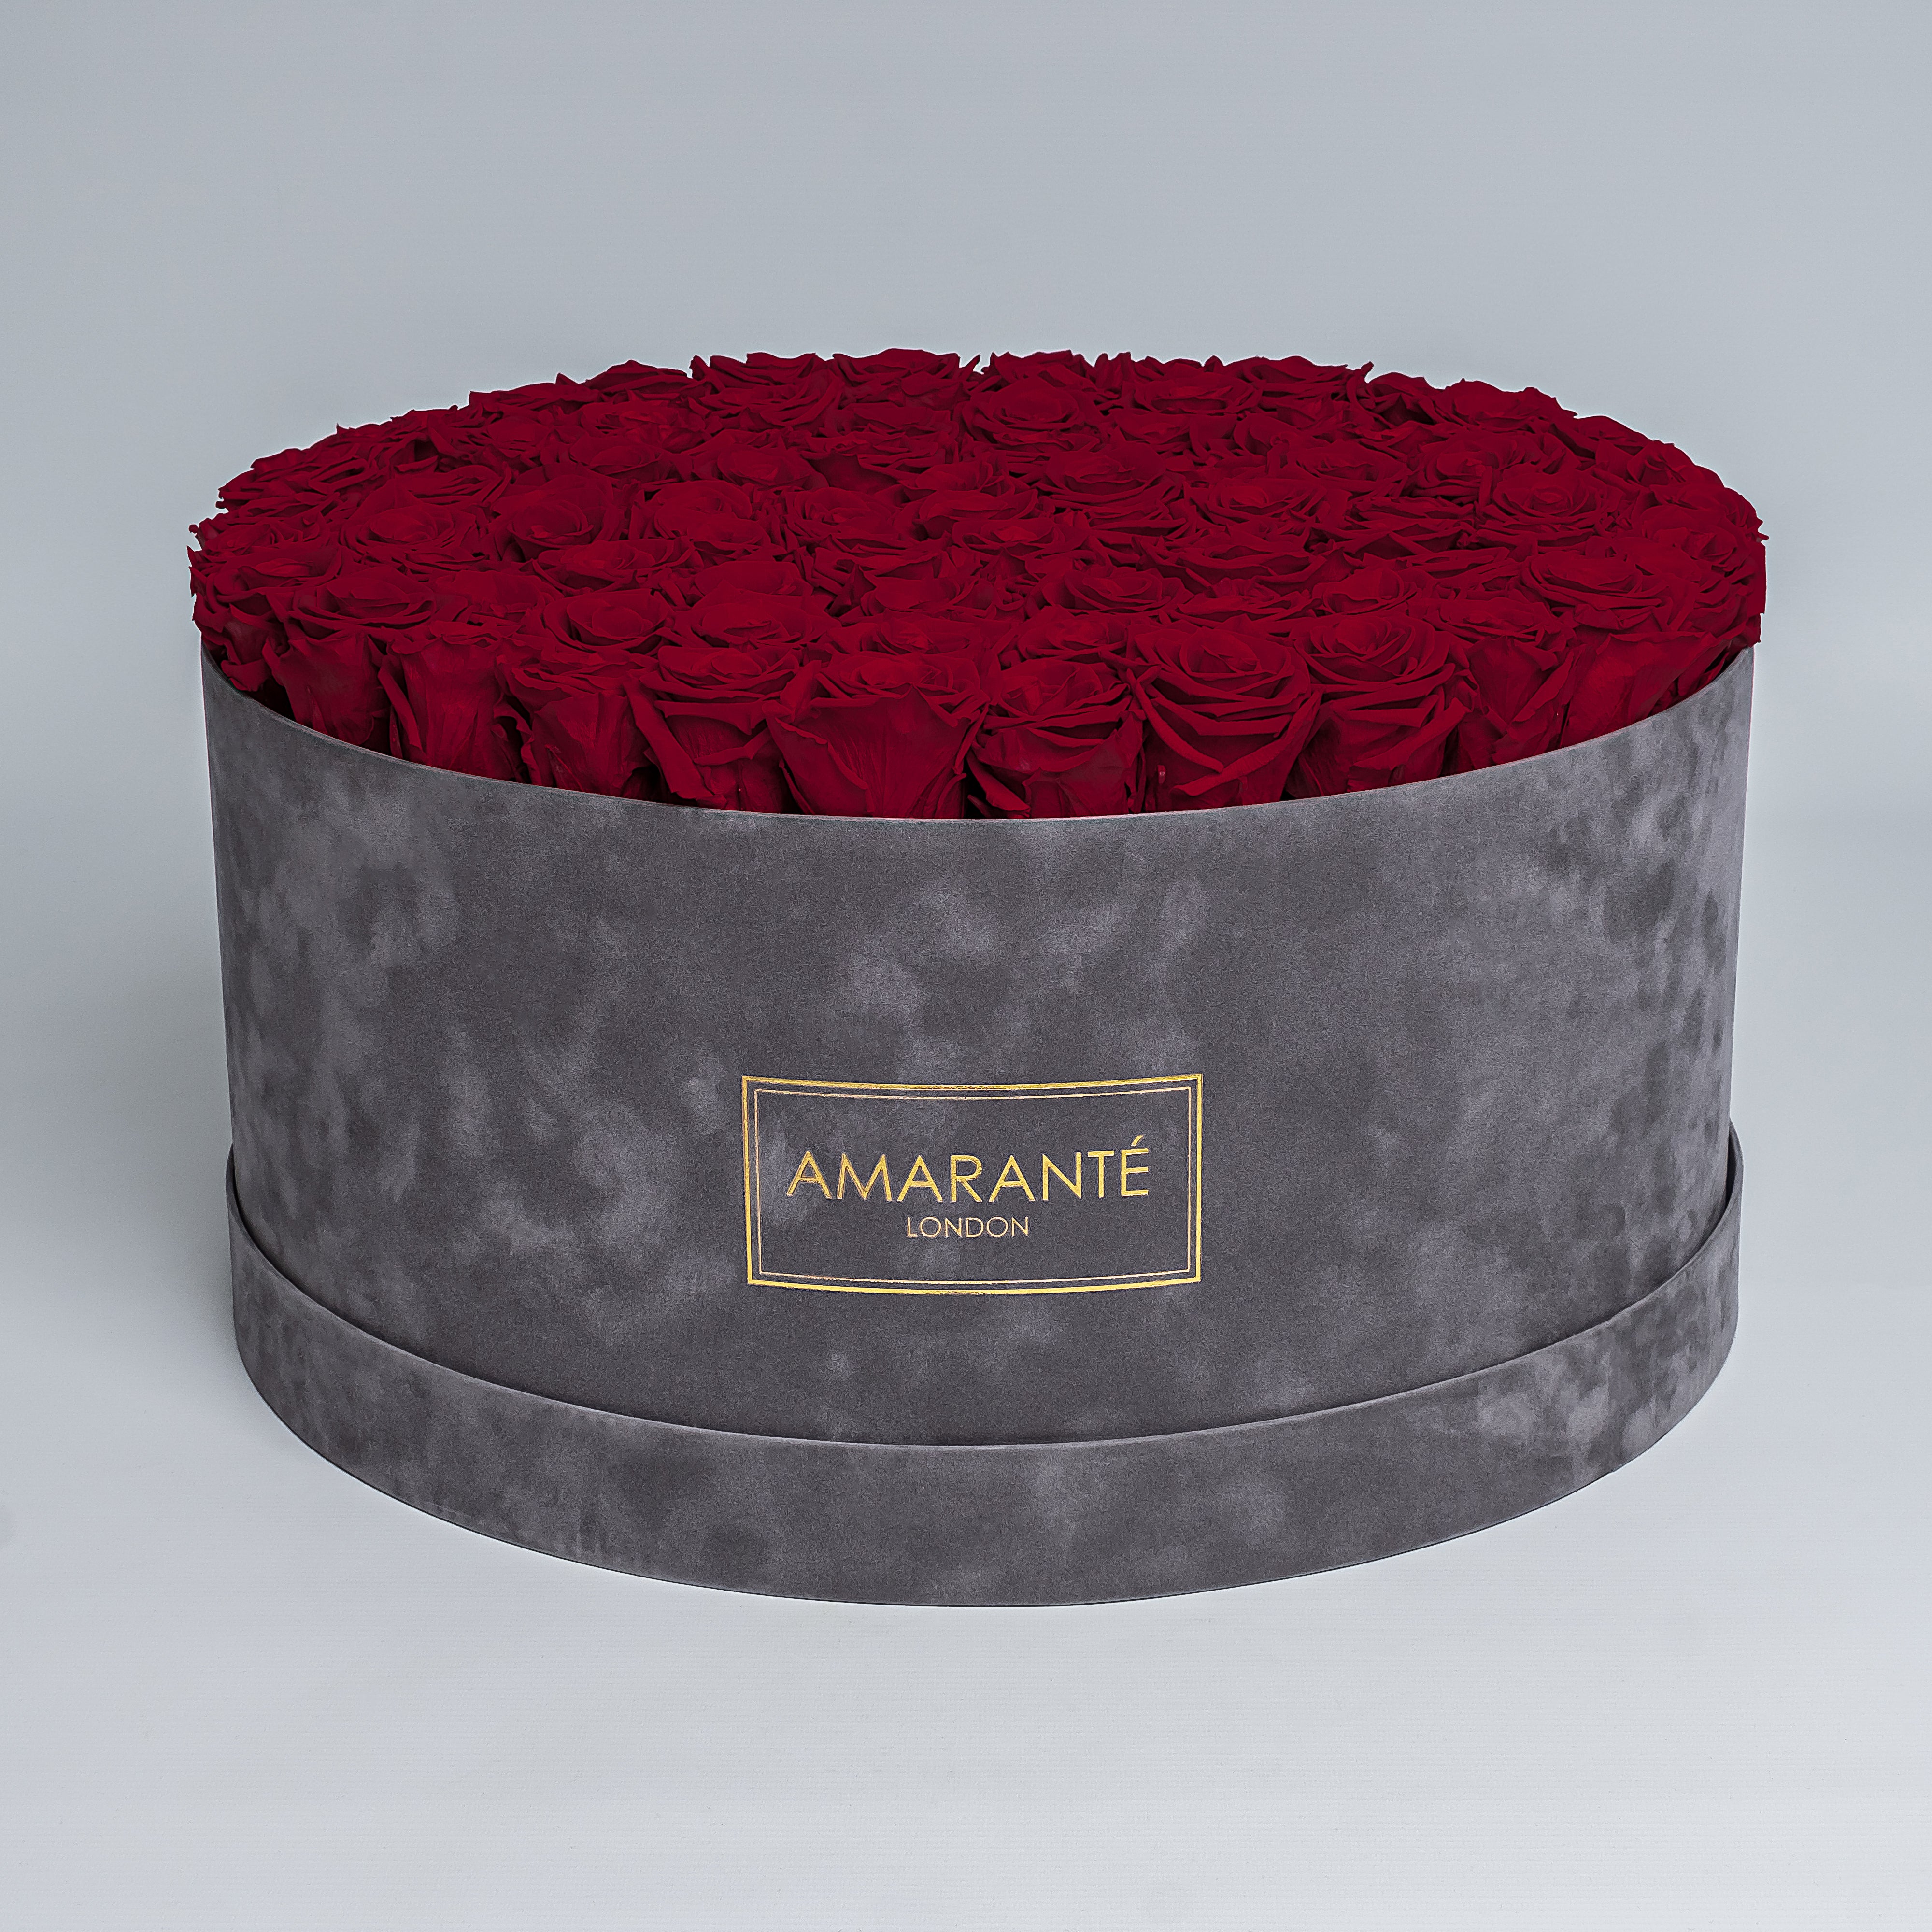 Extra Large Luxury bouquet of 100 deep red infinity roses in an elegant grey round rose box with delicate suede finish. Unique gift for showing timeless love and affection. FreeUK Delivery.